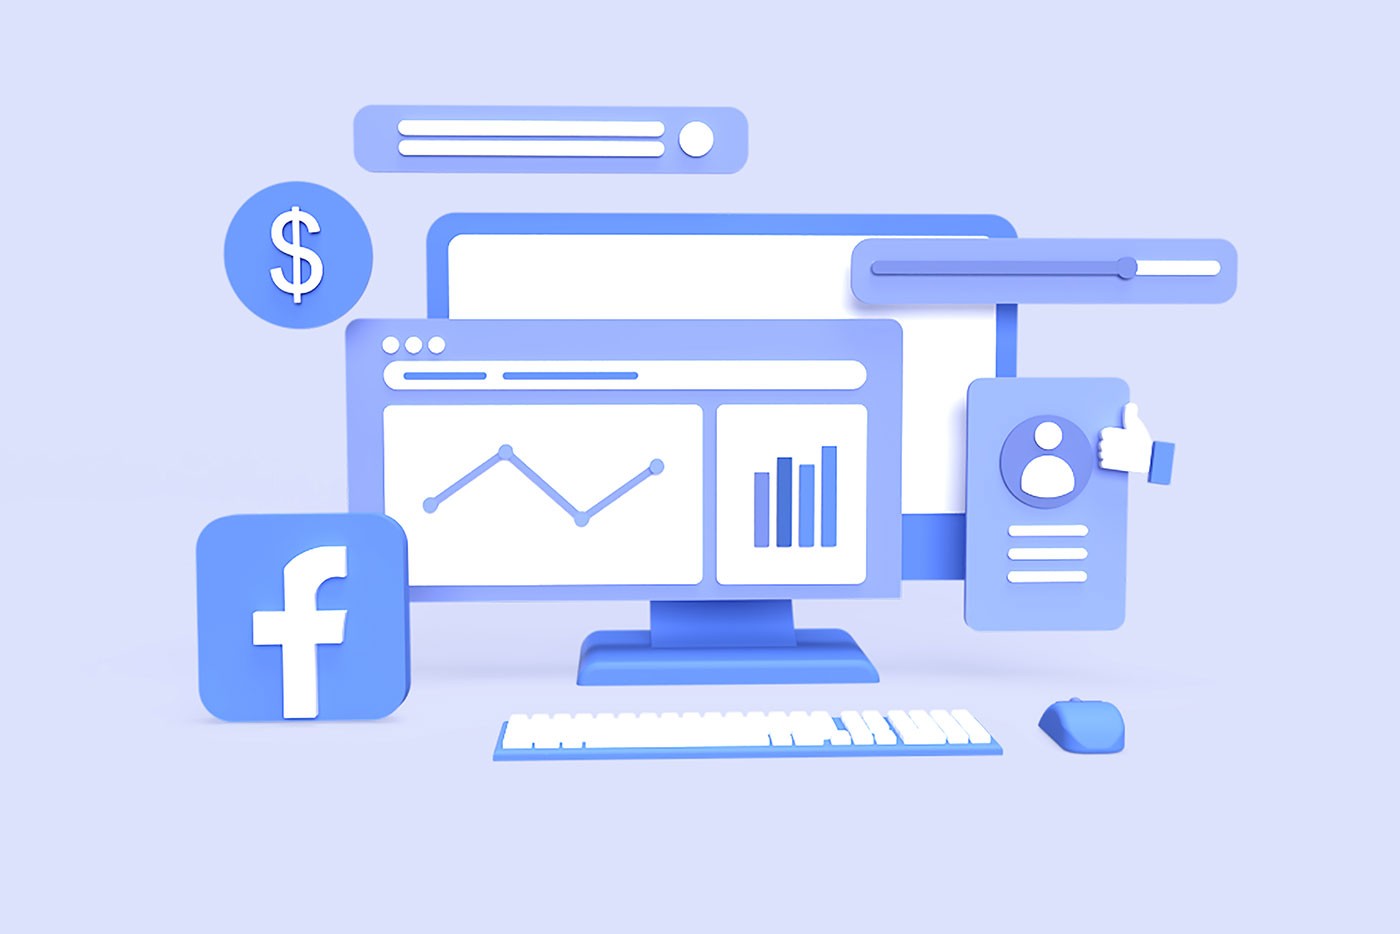 Facebook Ad tracking: Your A-Z Guide